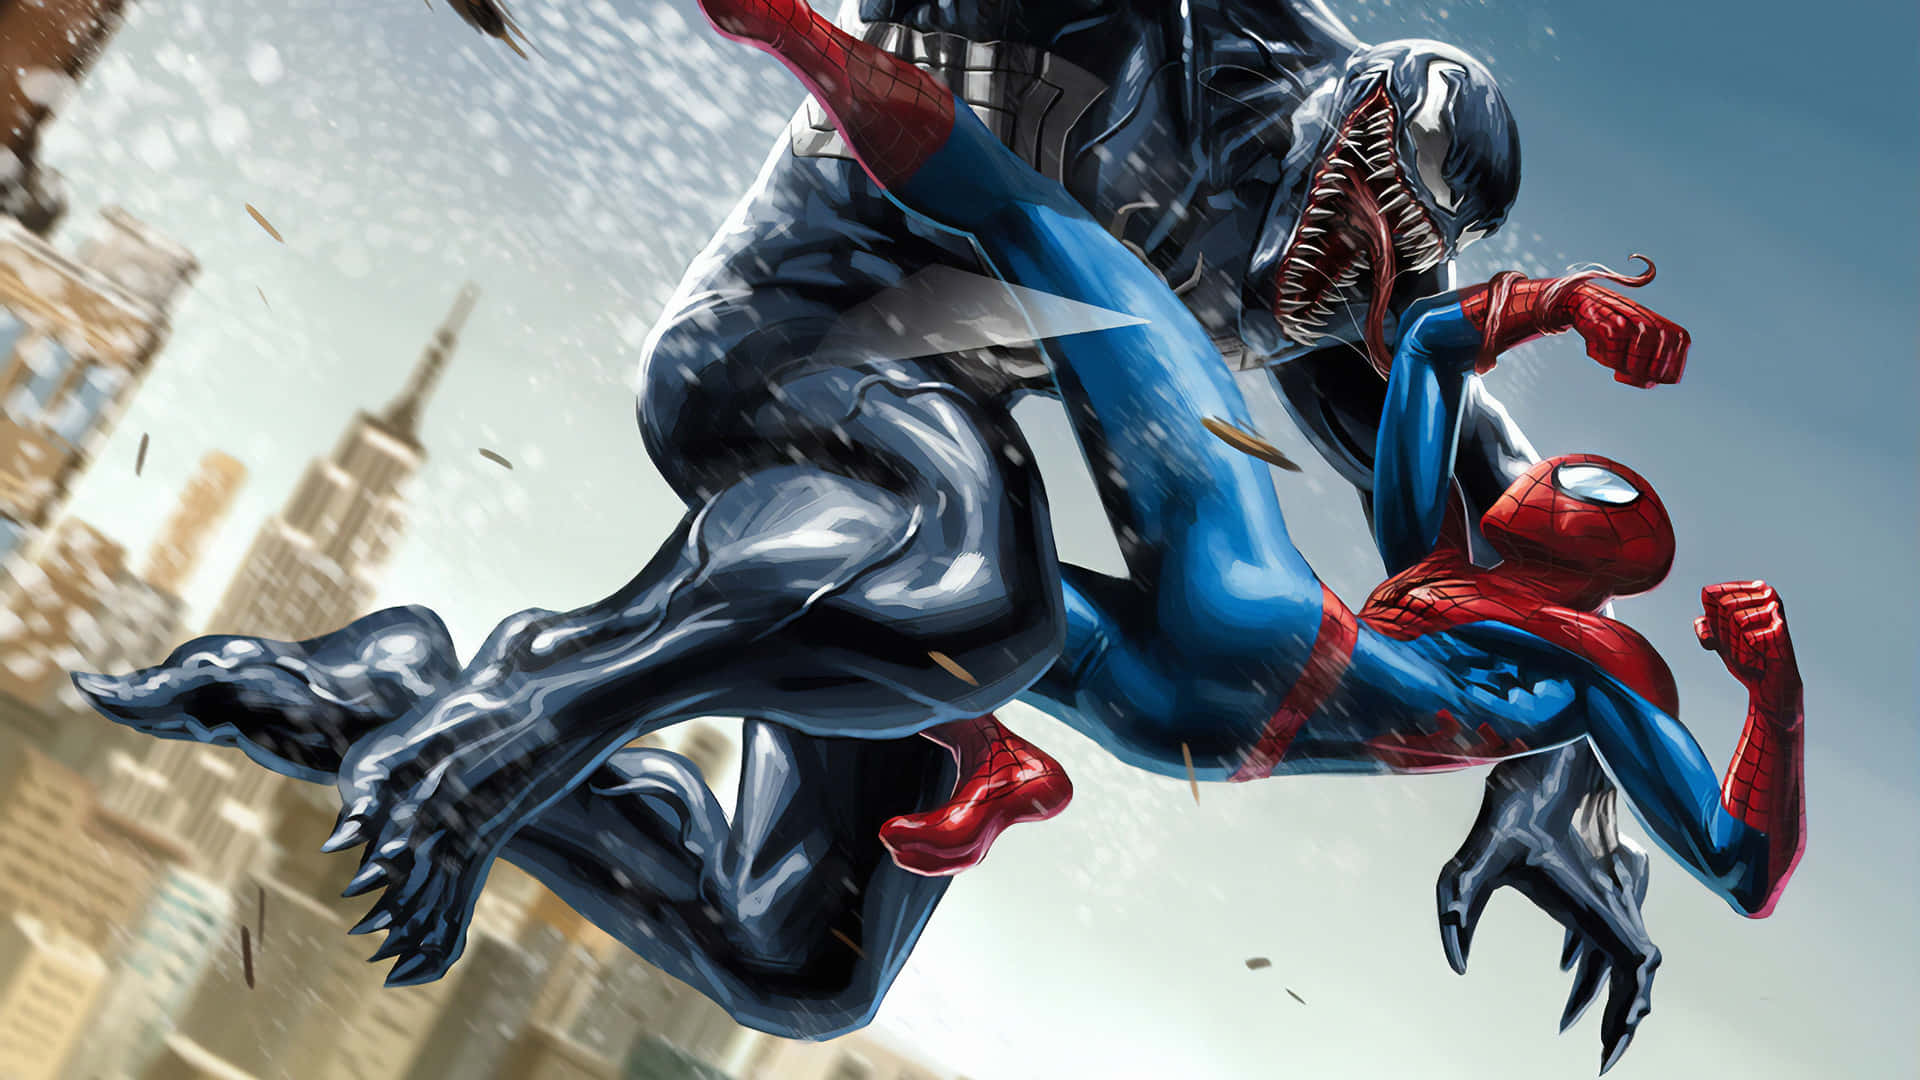 Venom And Spider Man Fighting In The City